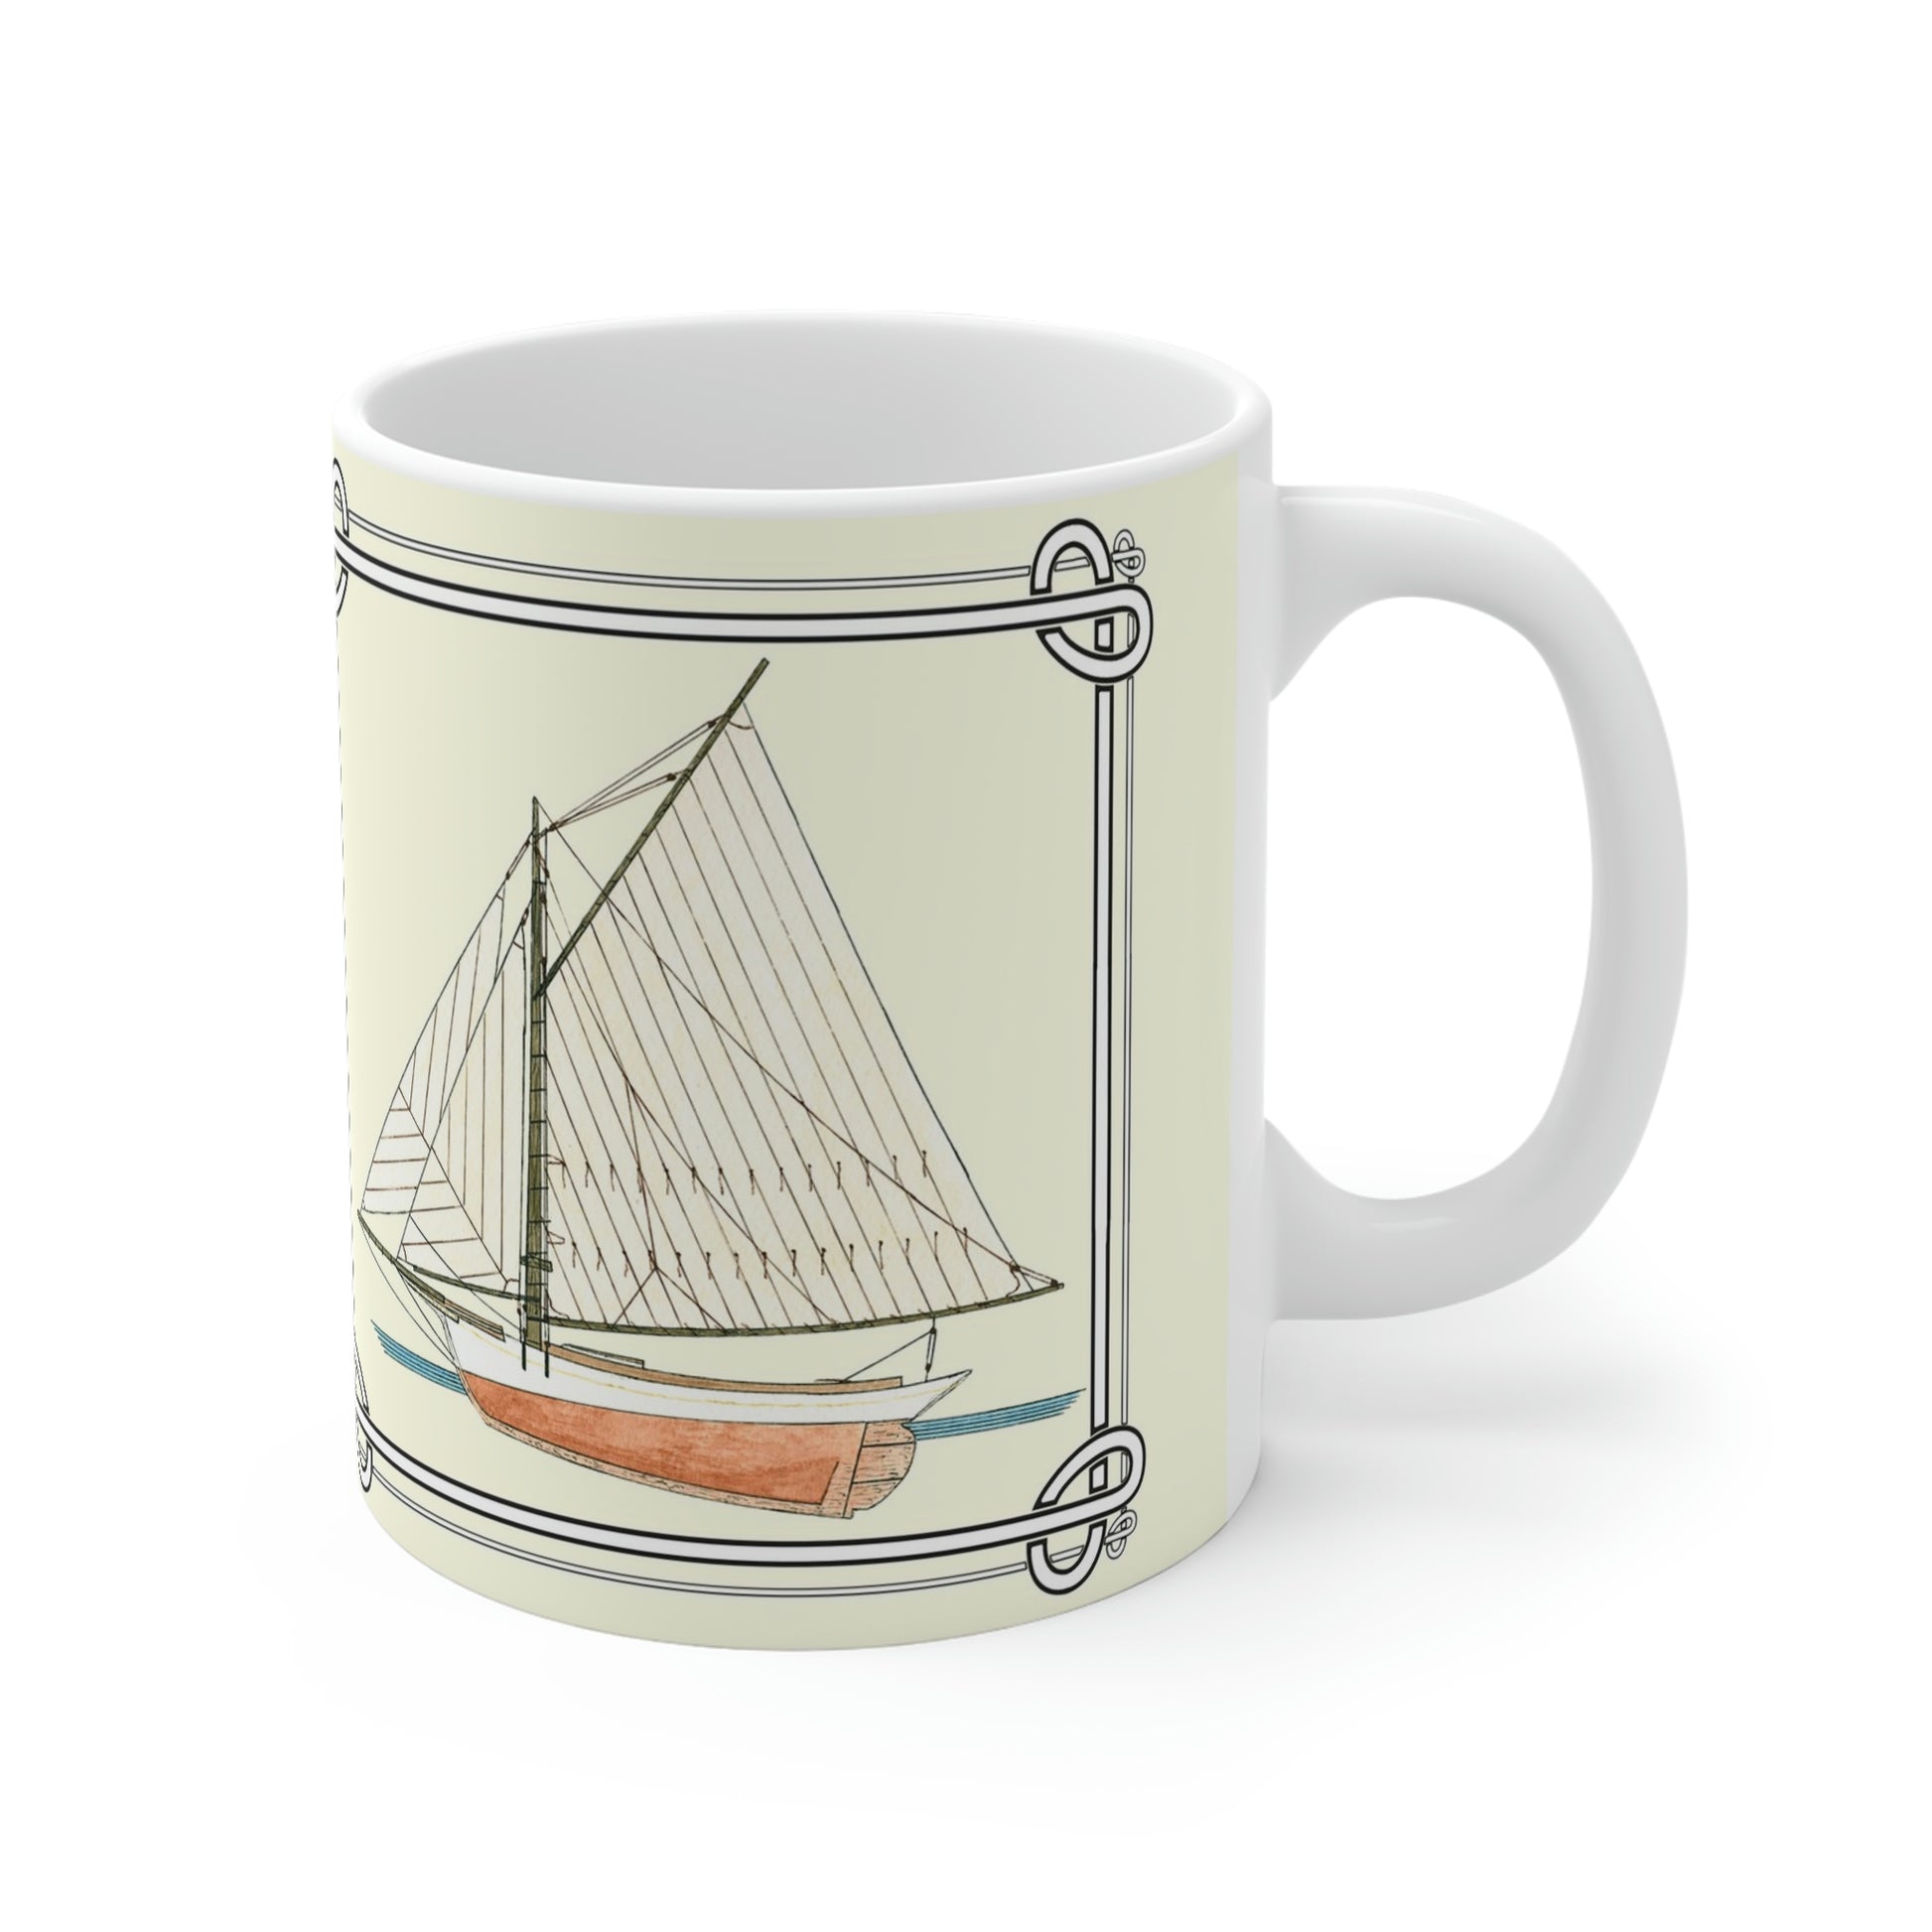 The Estella was a Maine Lobstering Sloop built in Penobscot Bay in the early 1900's. The mug design is a reproduction of an original watercolor by Lee M. Buchanan.